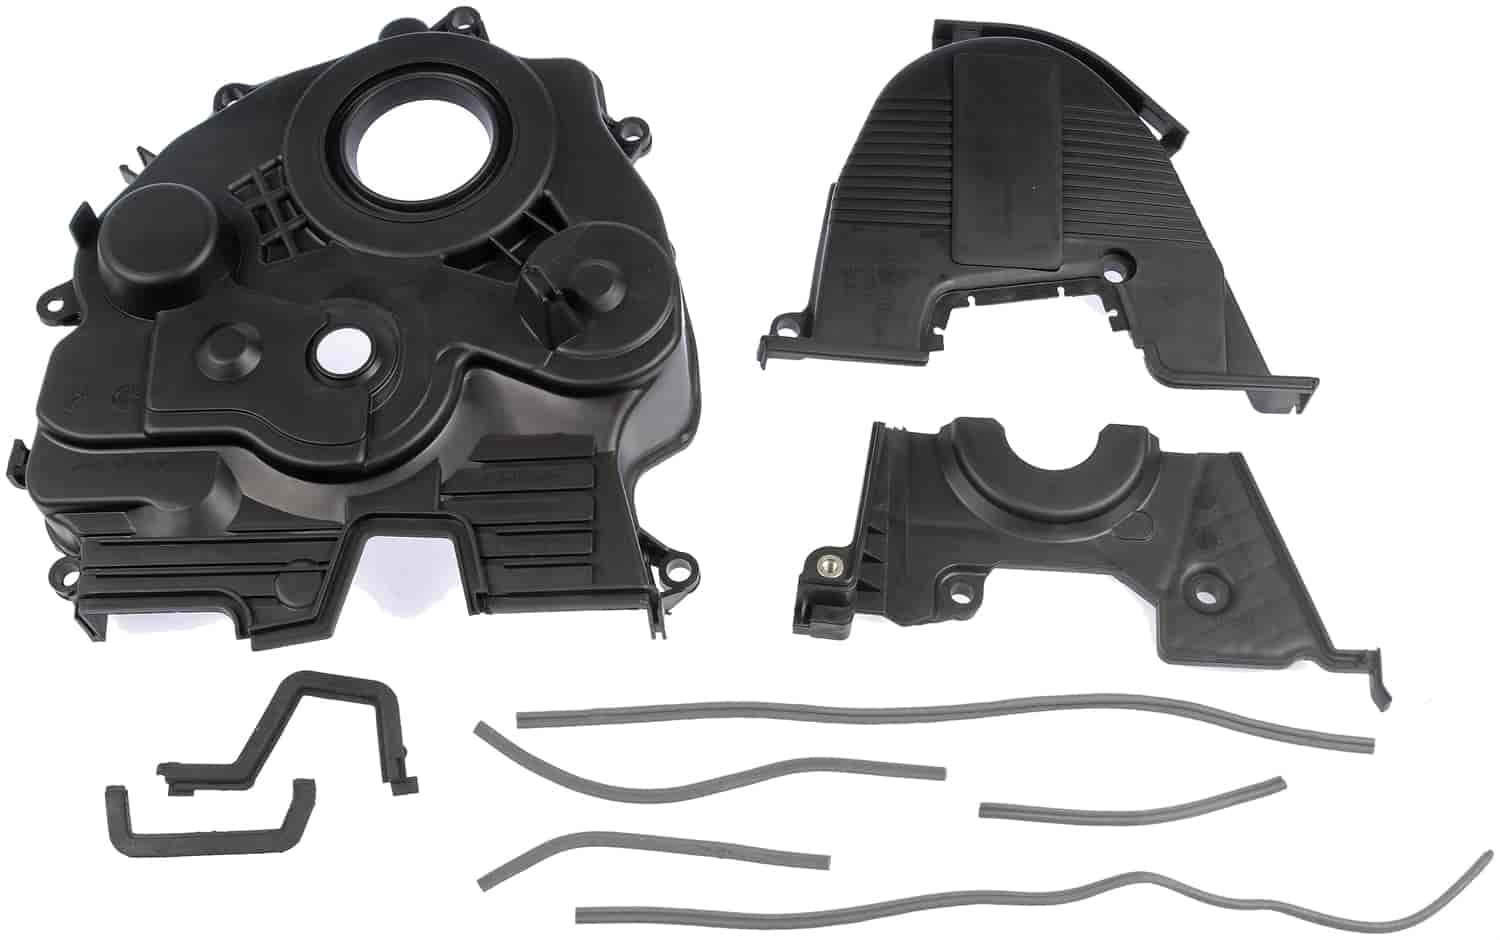 Timing Cover 1998-02 Accord 2.3L 1998-99 CL 2.3L